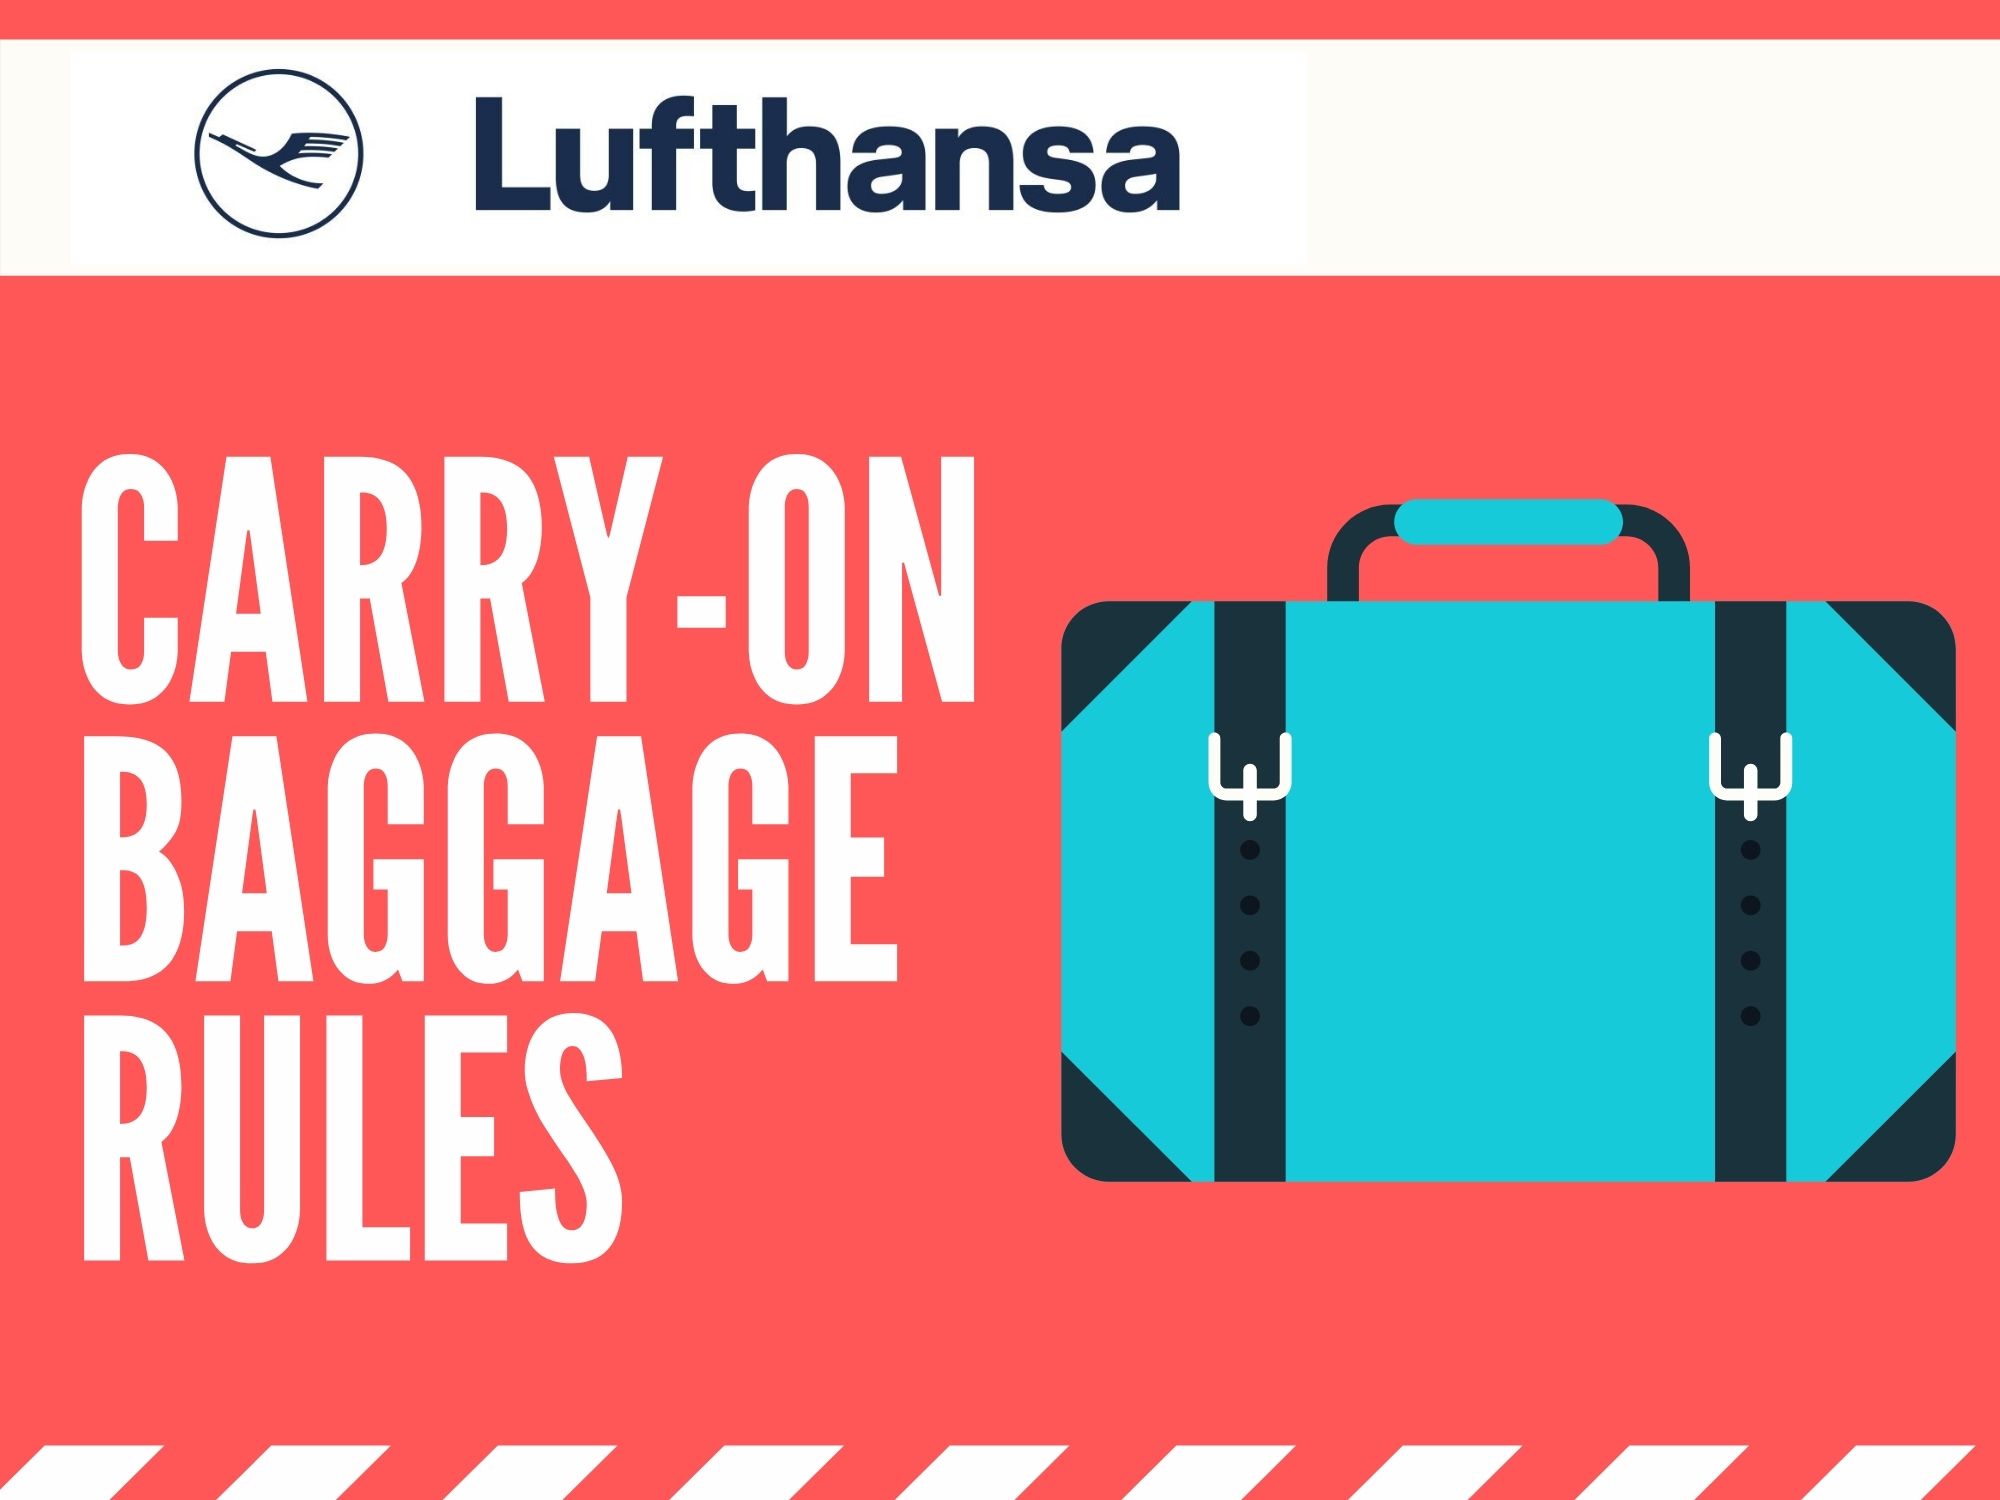 air travel restrictions for carry on luggage